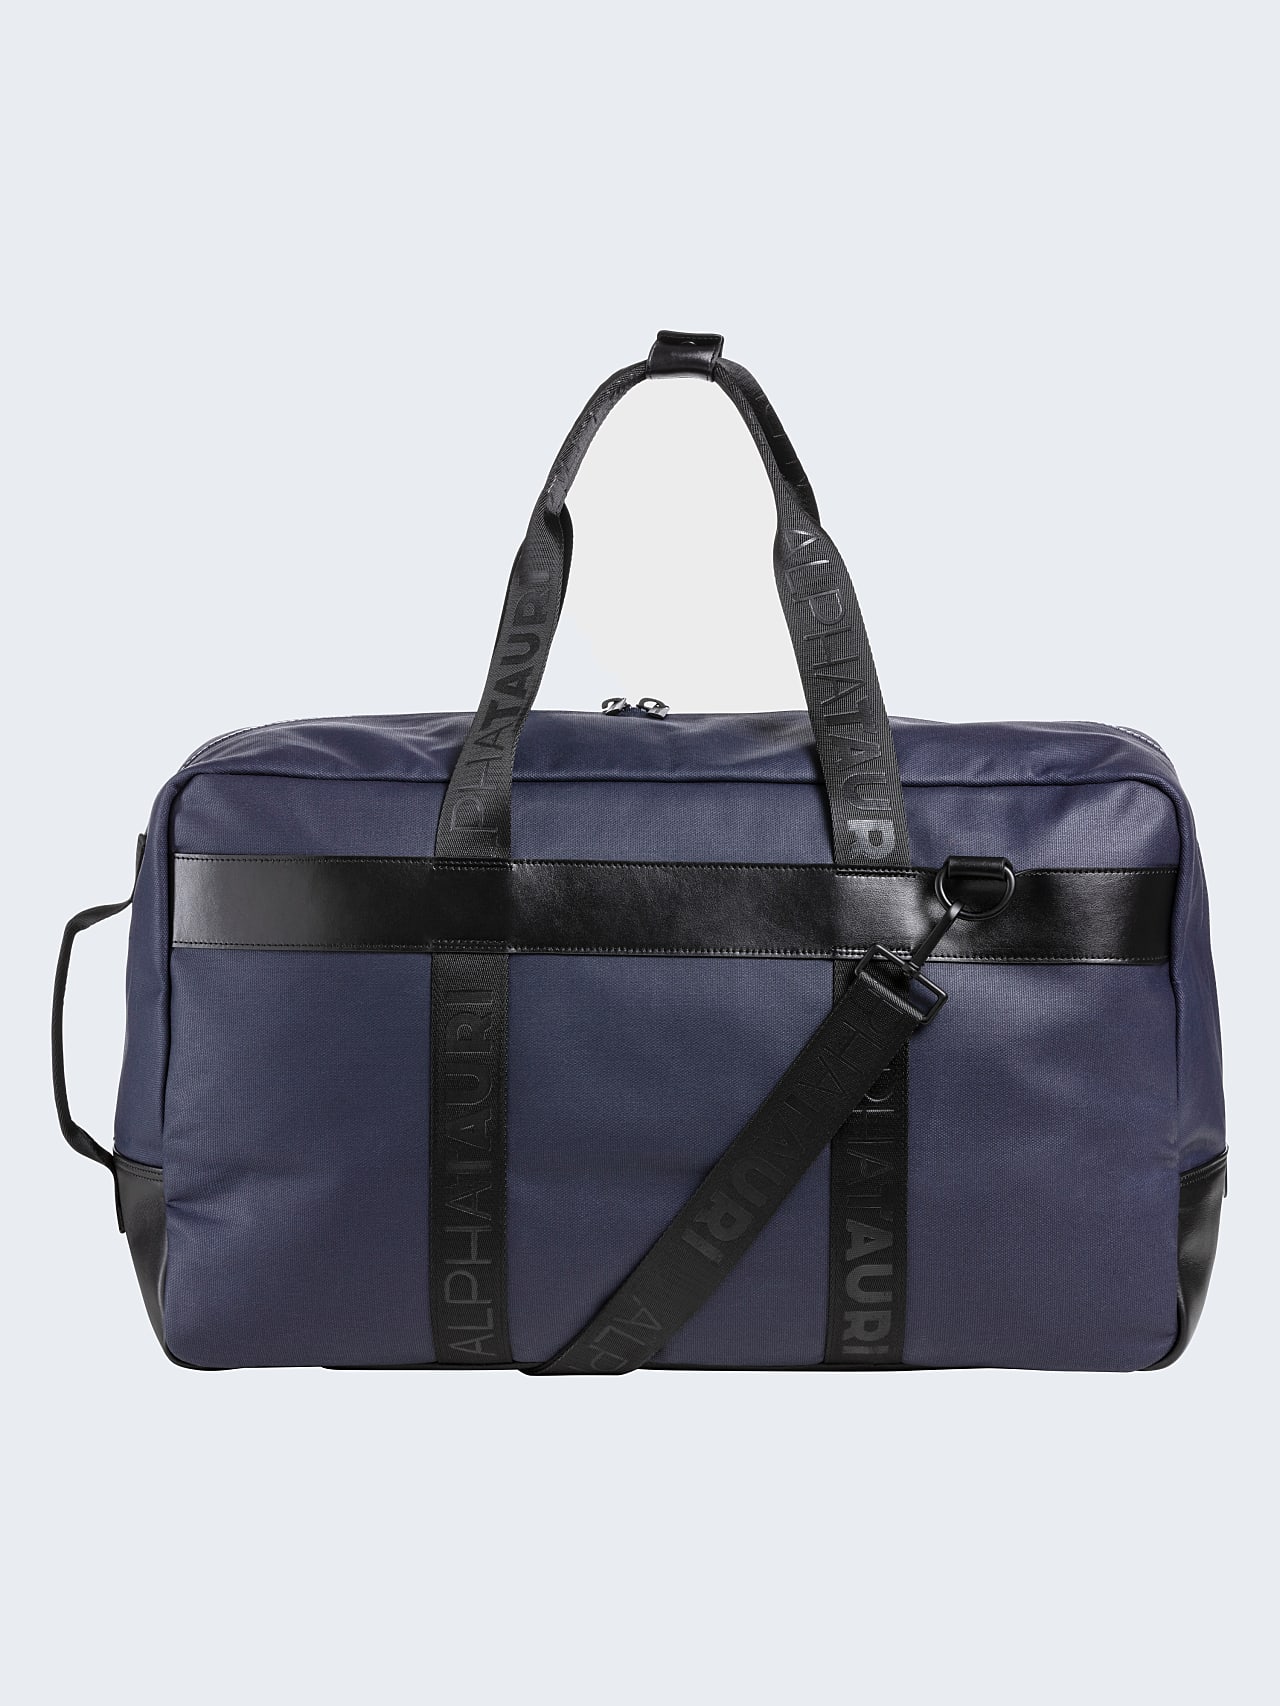 AlphaTauri | AWEE V5.Y6.01 | Water-repellent Canvas Weekend Bag in navy for Unisex